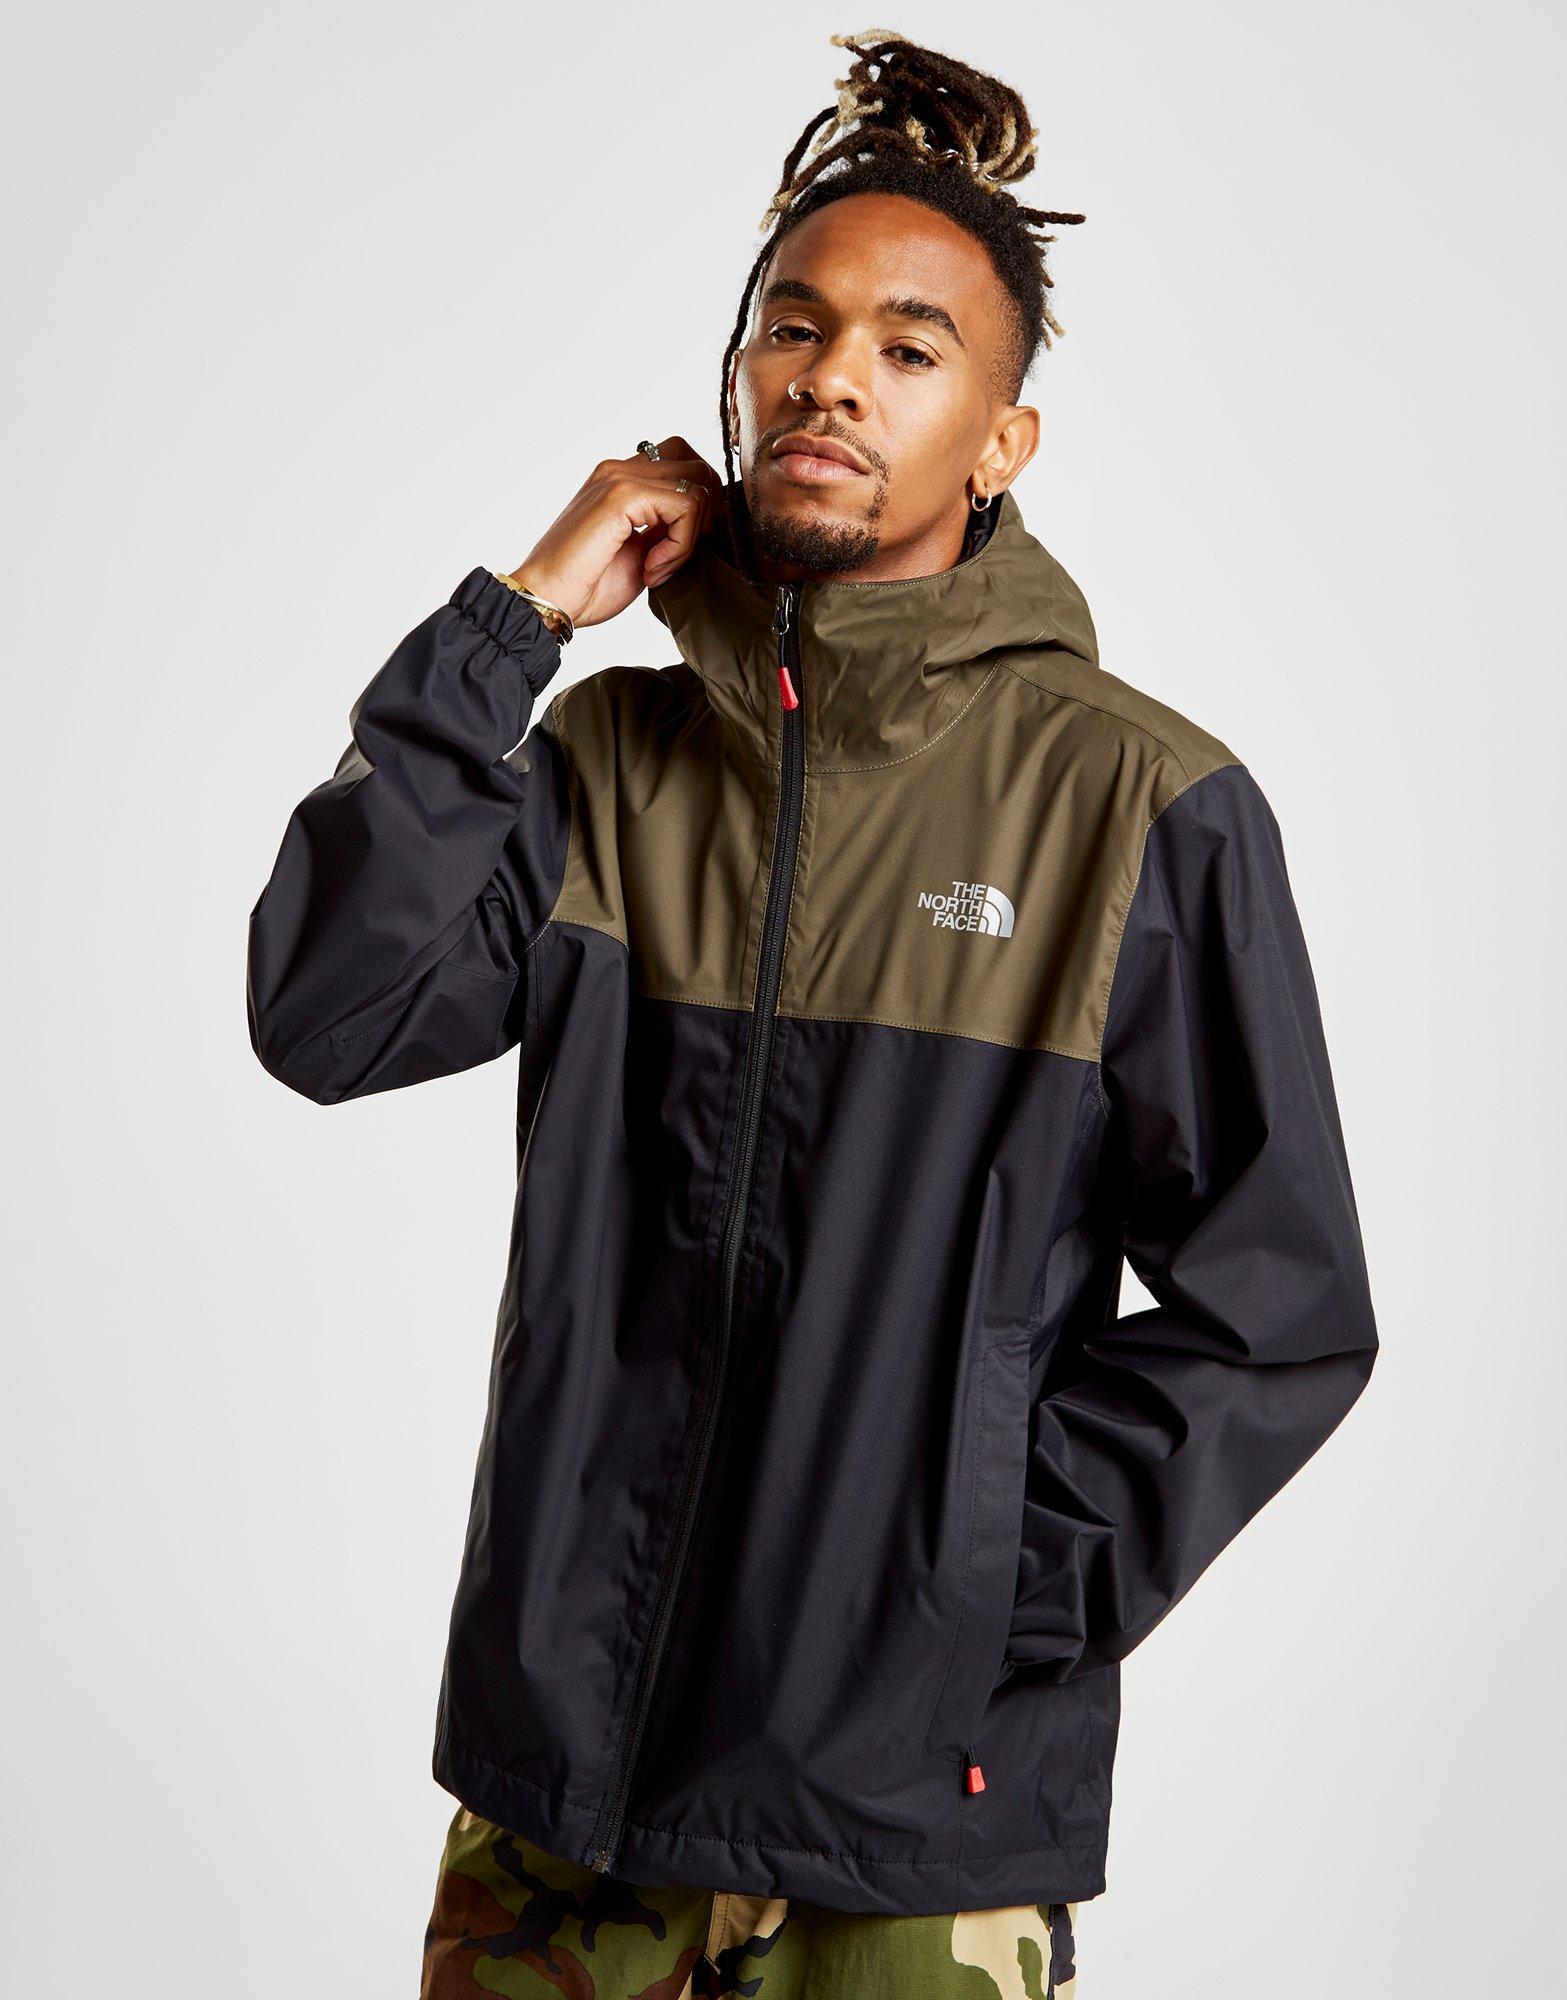 The North Face Ost Jacket Online Shopping For Women Men Kids Fashion Lifestyle Free Delivery Returns